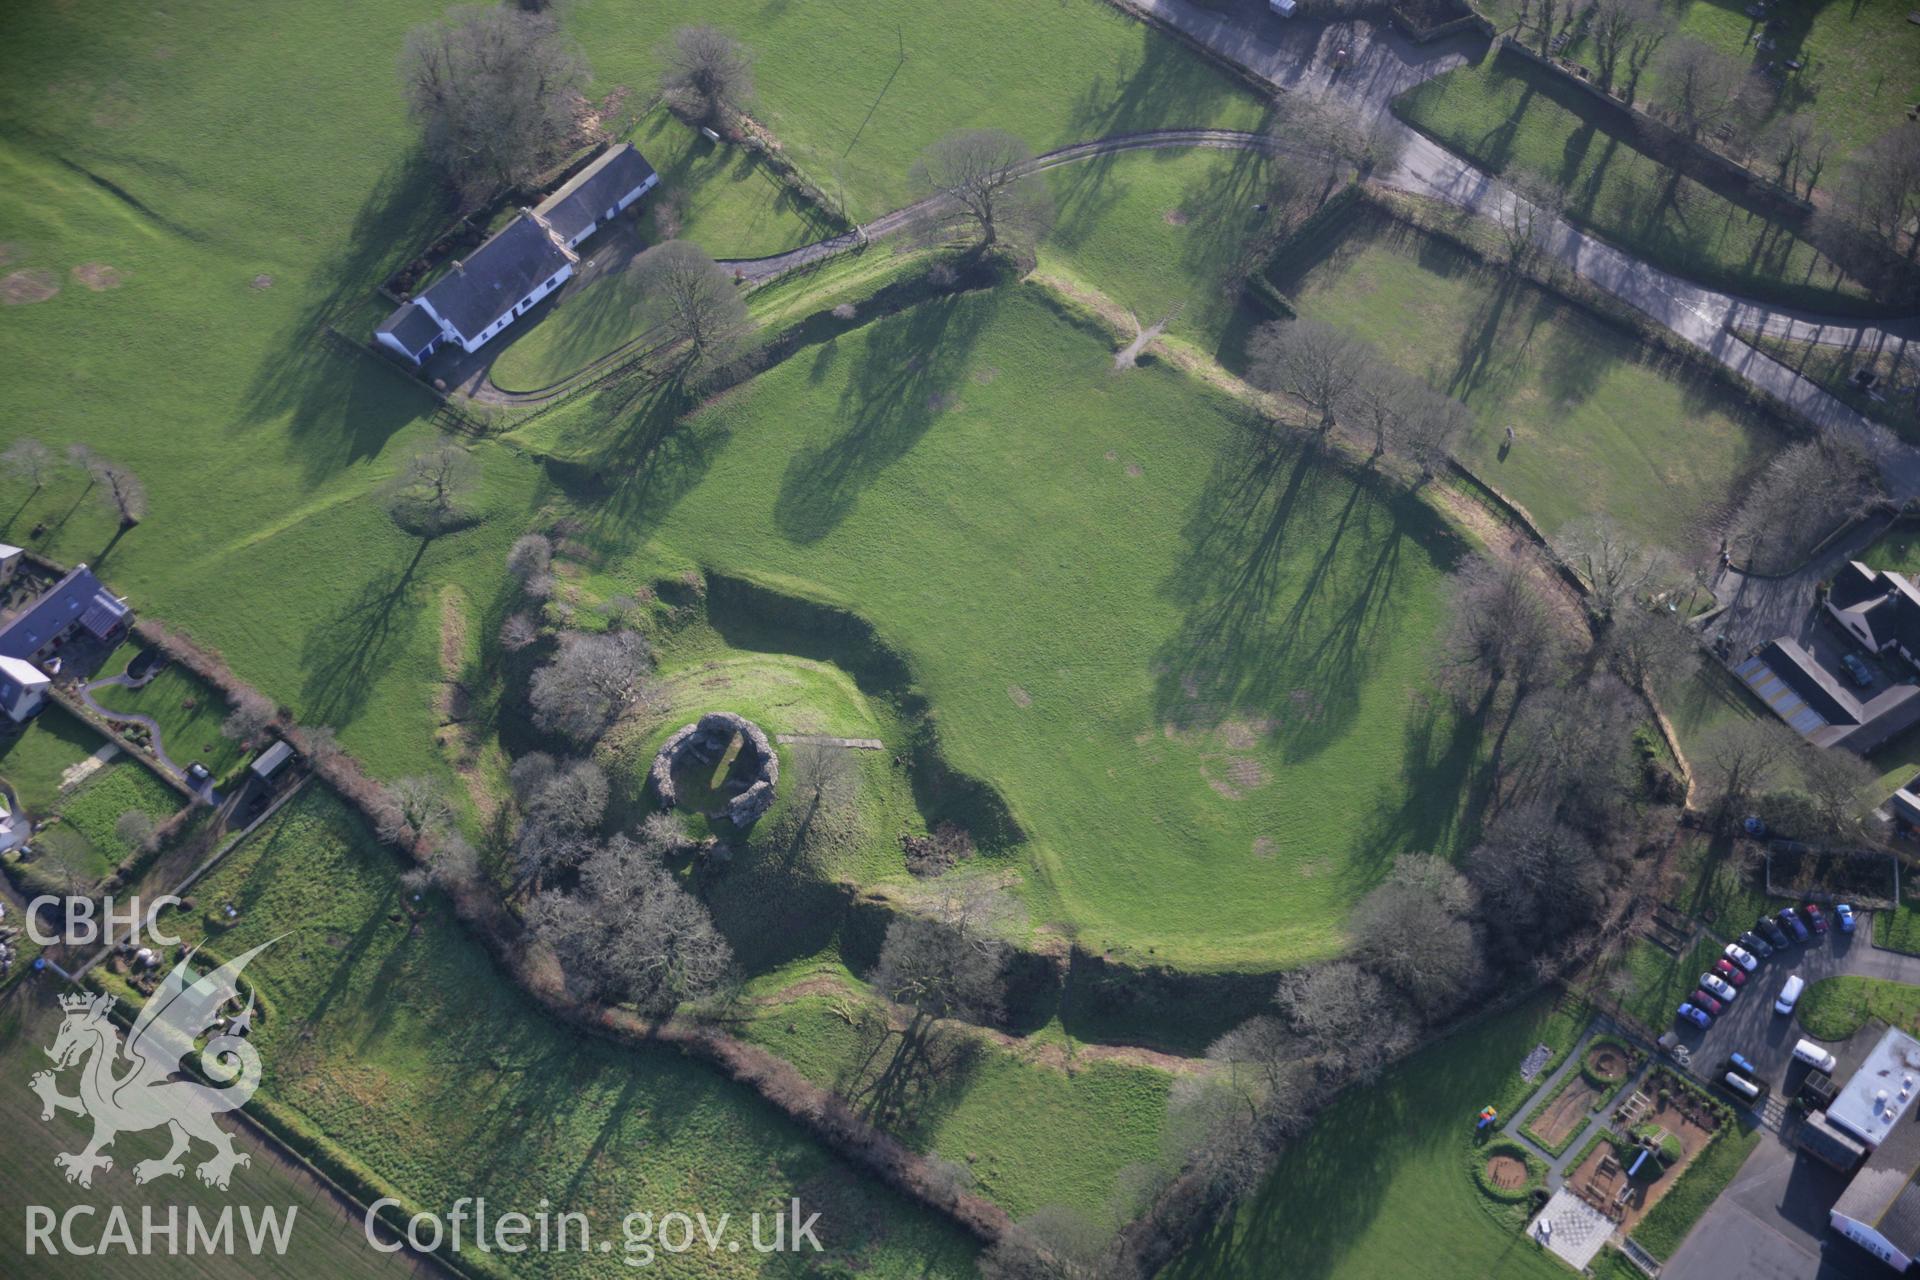 RCAHMW colour oblique aerial photograph of Wiston Castle from the north-west. Taken on 11 January 2006 by Toby Driver.